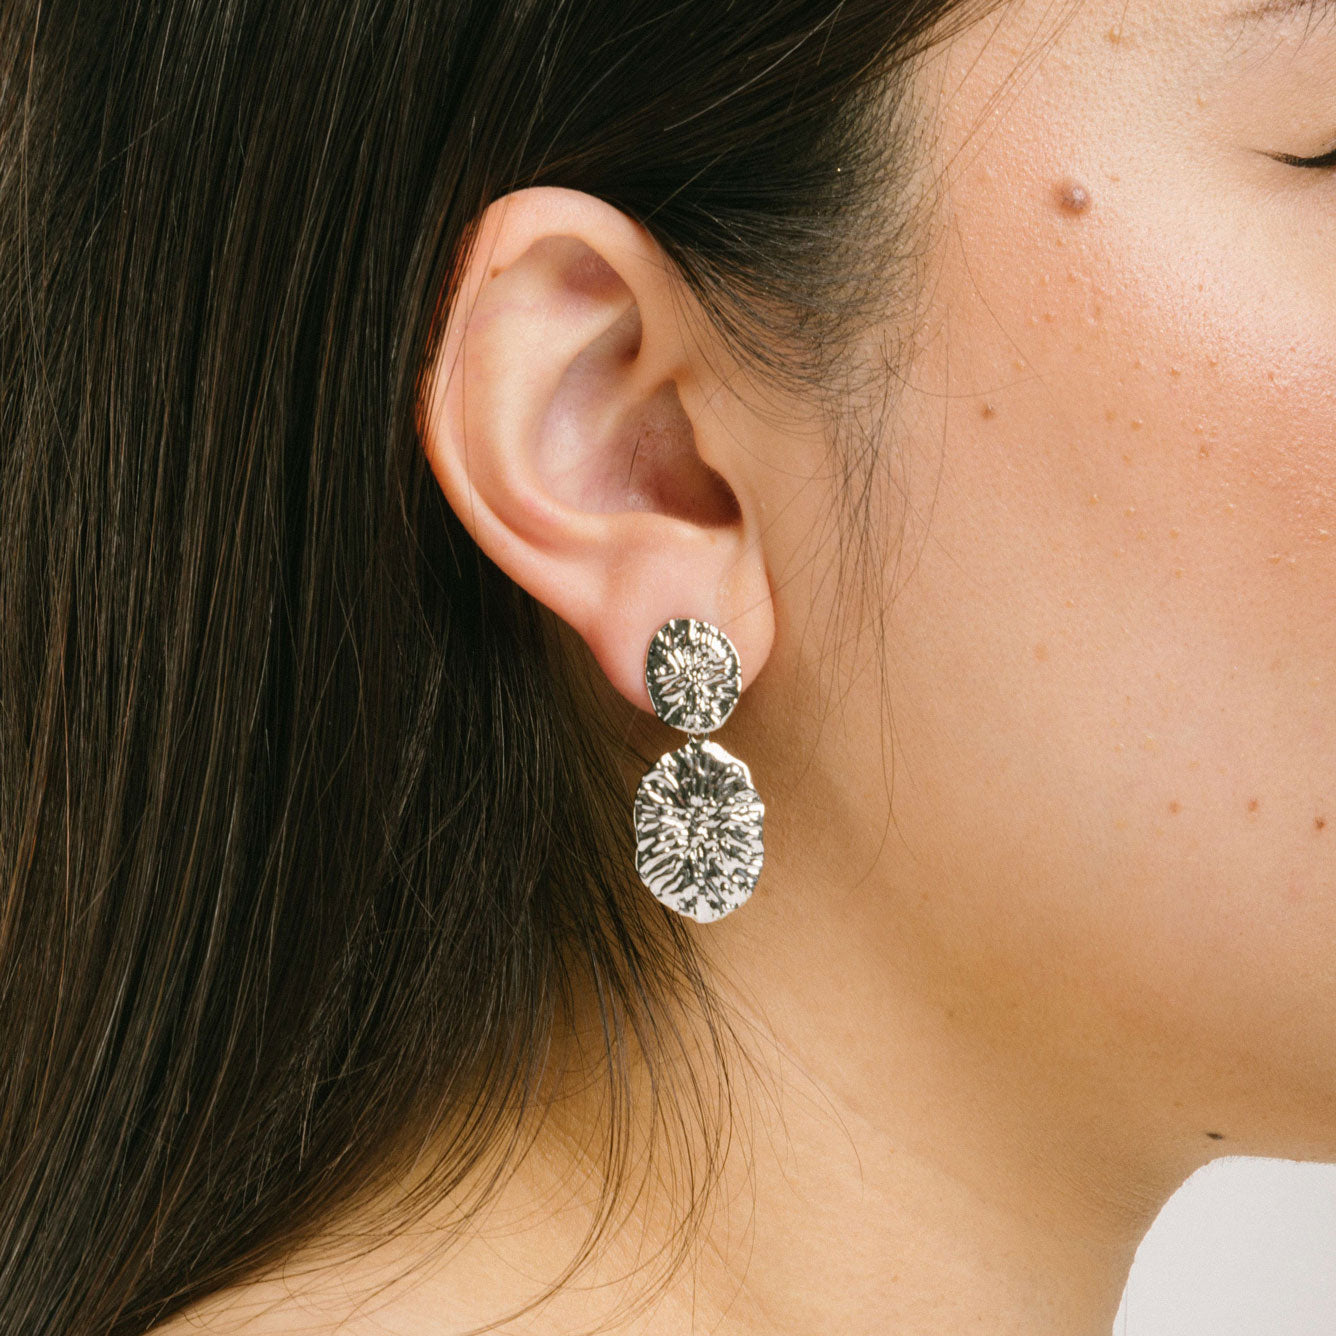 A model wearing the Daiquiri Drop Clip On Earrings in Silver feature a secure, padded clip-on closure ideal for all ear types, offering up to 12 hours of comfortable wear. Crafted from Zinc and Copper alloy, these earrings come as a single pair with removable rubber padding.